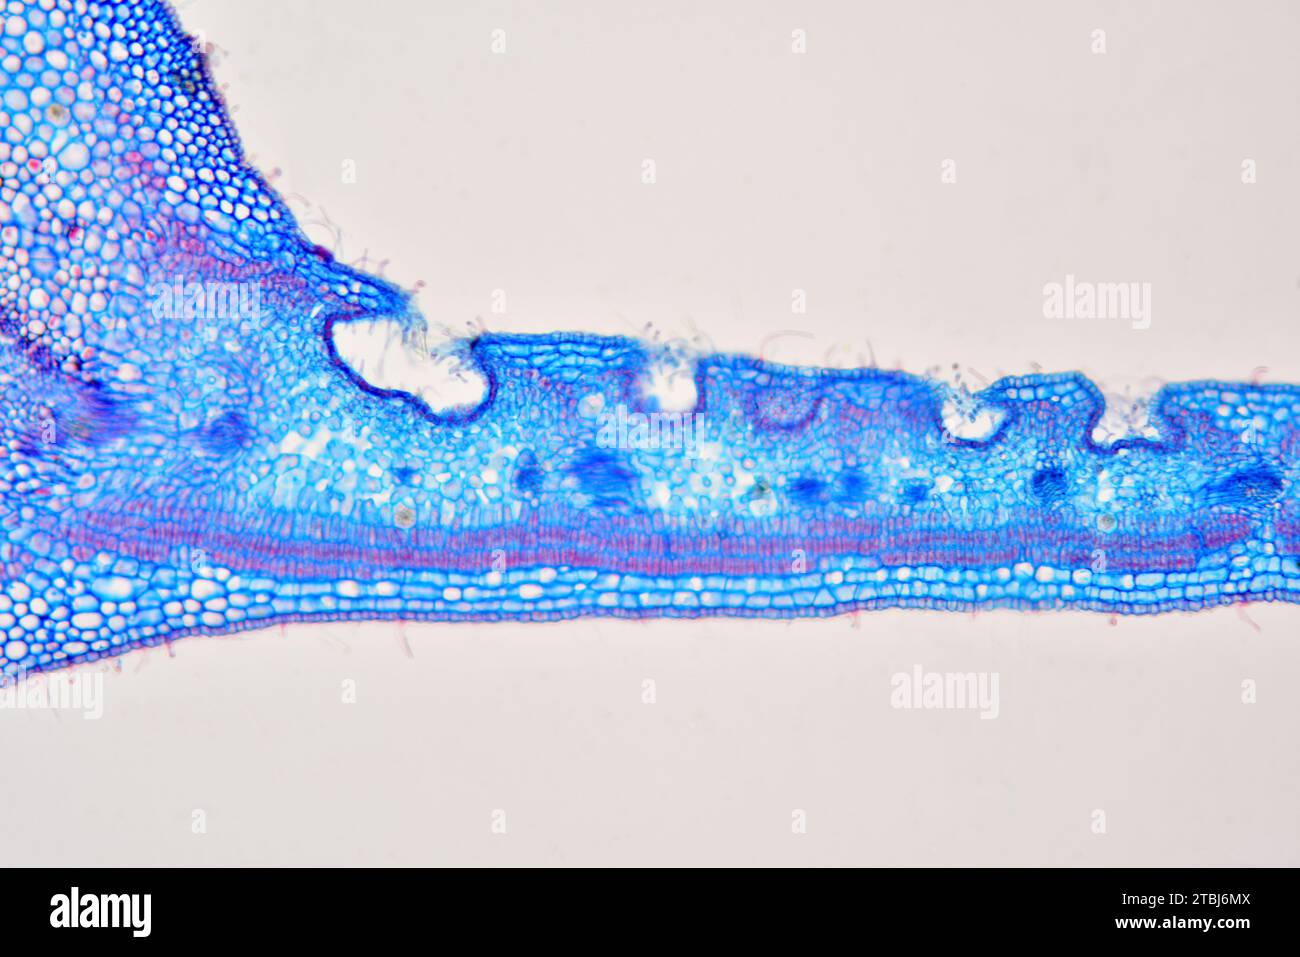 Leaf cross section of Nerium oleander showing epidermis, palisade mesophyll, spongy mesophyll and stomatal crypt. Optical microscope X100. Stock Photo